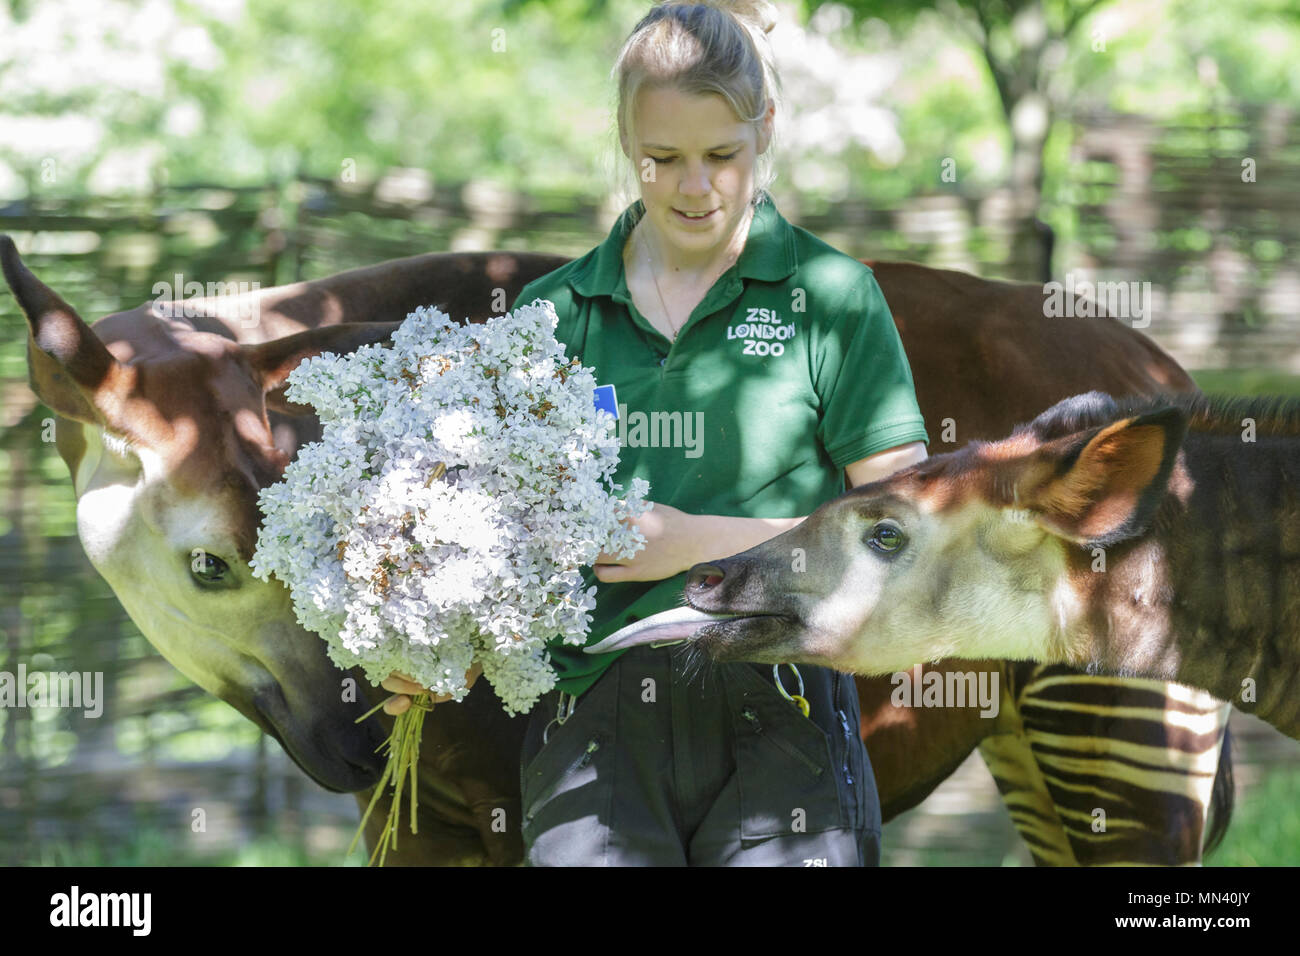 ZSL London Zoo, London, 14th May 2018. Meghan, the young okapi, with her mum Oni and keeper Gemma Metcalf, is given a royal treat to celebrate the forthcoming Royal Wedding – a bouquet of edible violet flowers to rival her namesake’s, Meghan Markle. The five-month-old, who was named after Meghan to commemorate the Royal couple’s engagement, is given the tasty blooms ahead of the big day - so neither Meghan has to share the spotlight. Credit: Imageplotter News and Sports/Alamy Live News Stock Photo